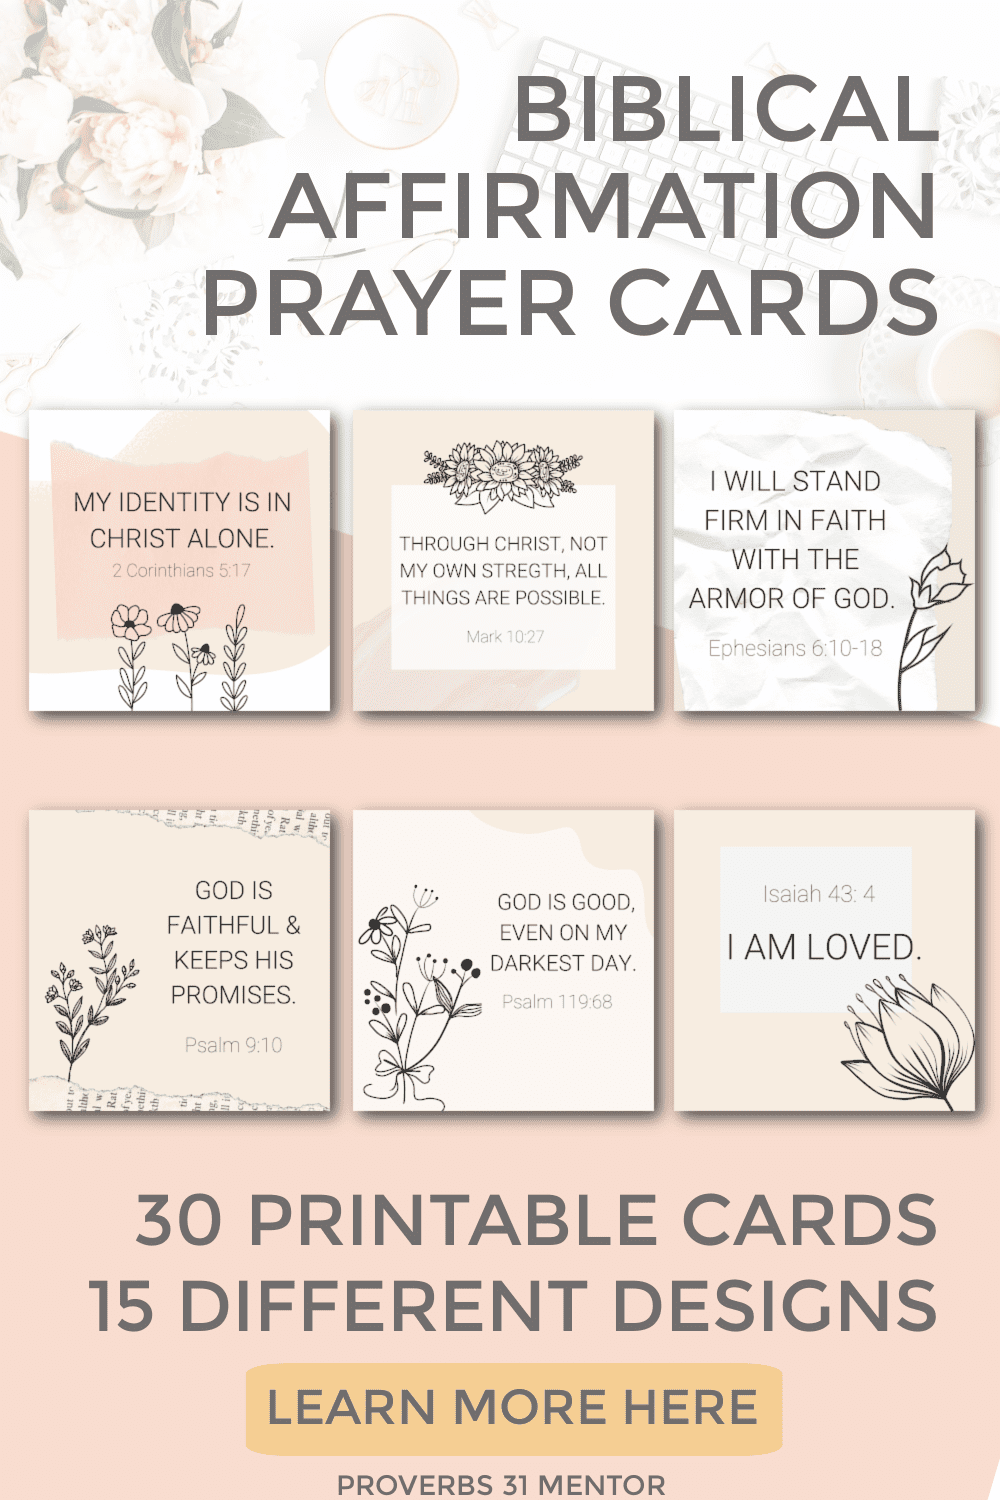 Step into the new beginnings of Christ with these biblical affirmation cards